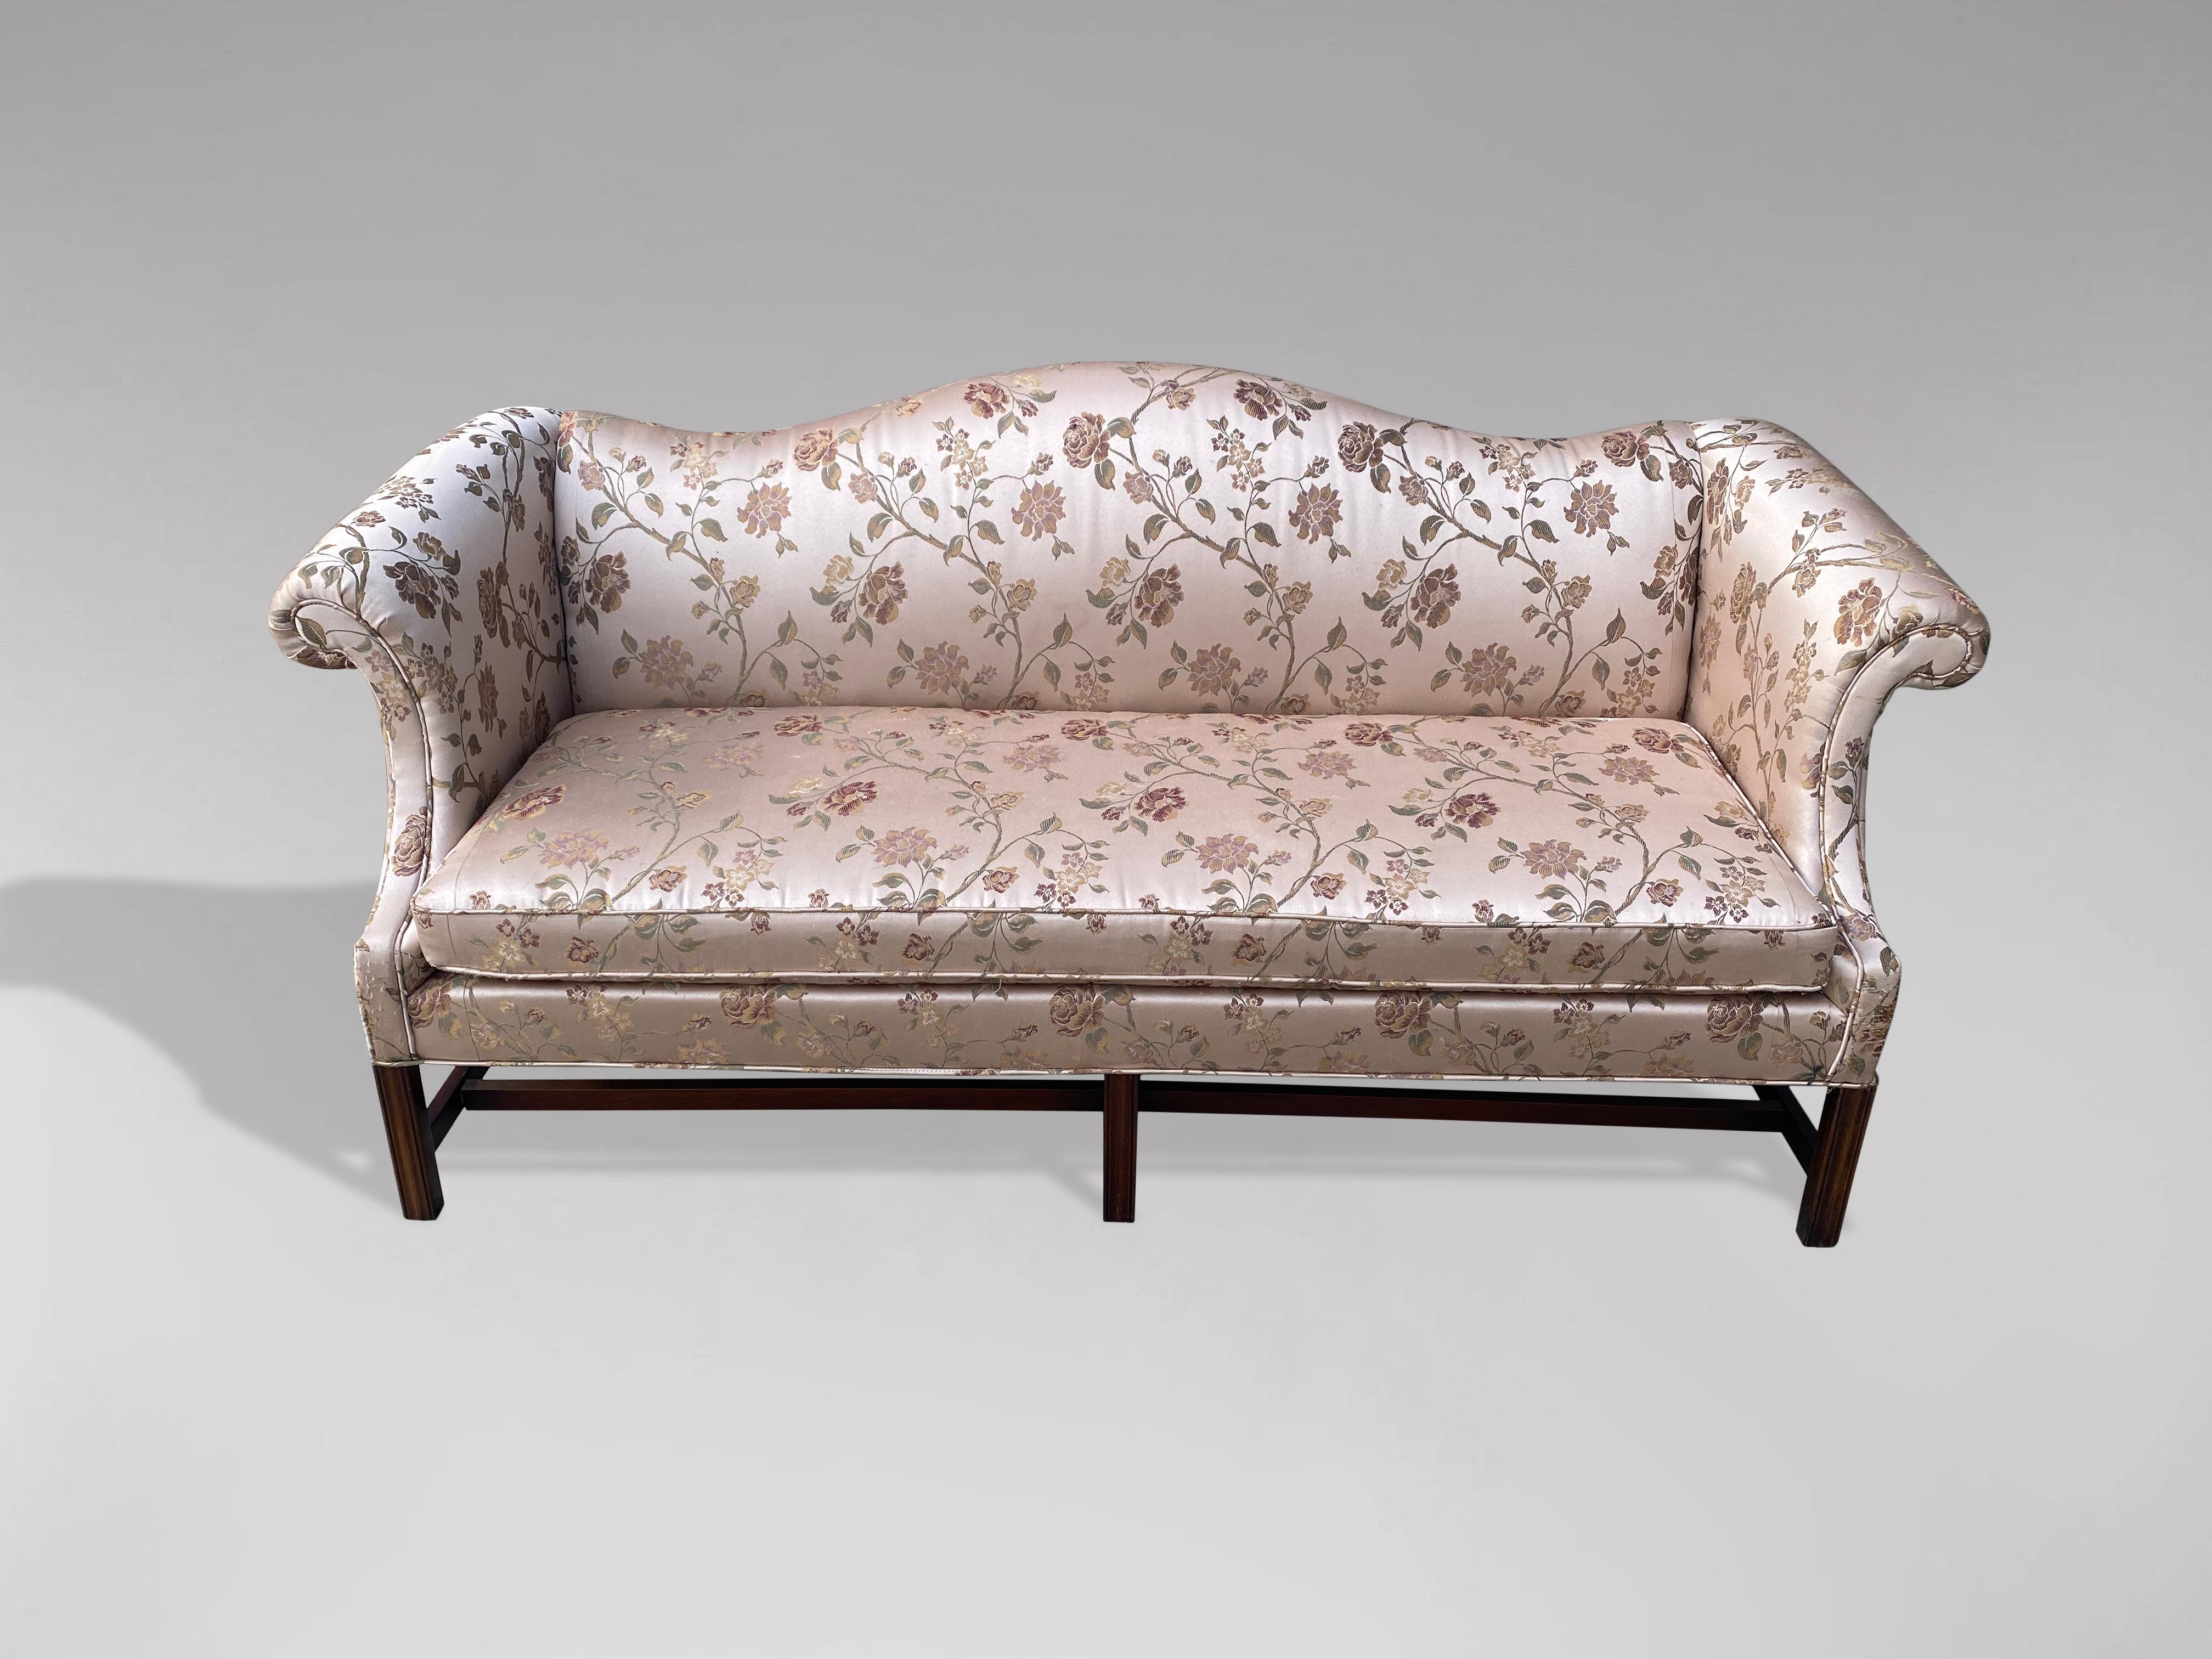 British 20th Century George III Style Upholstered Humpback Sofa For Sale